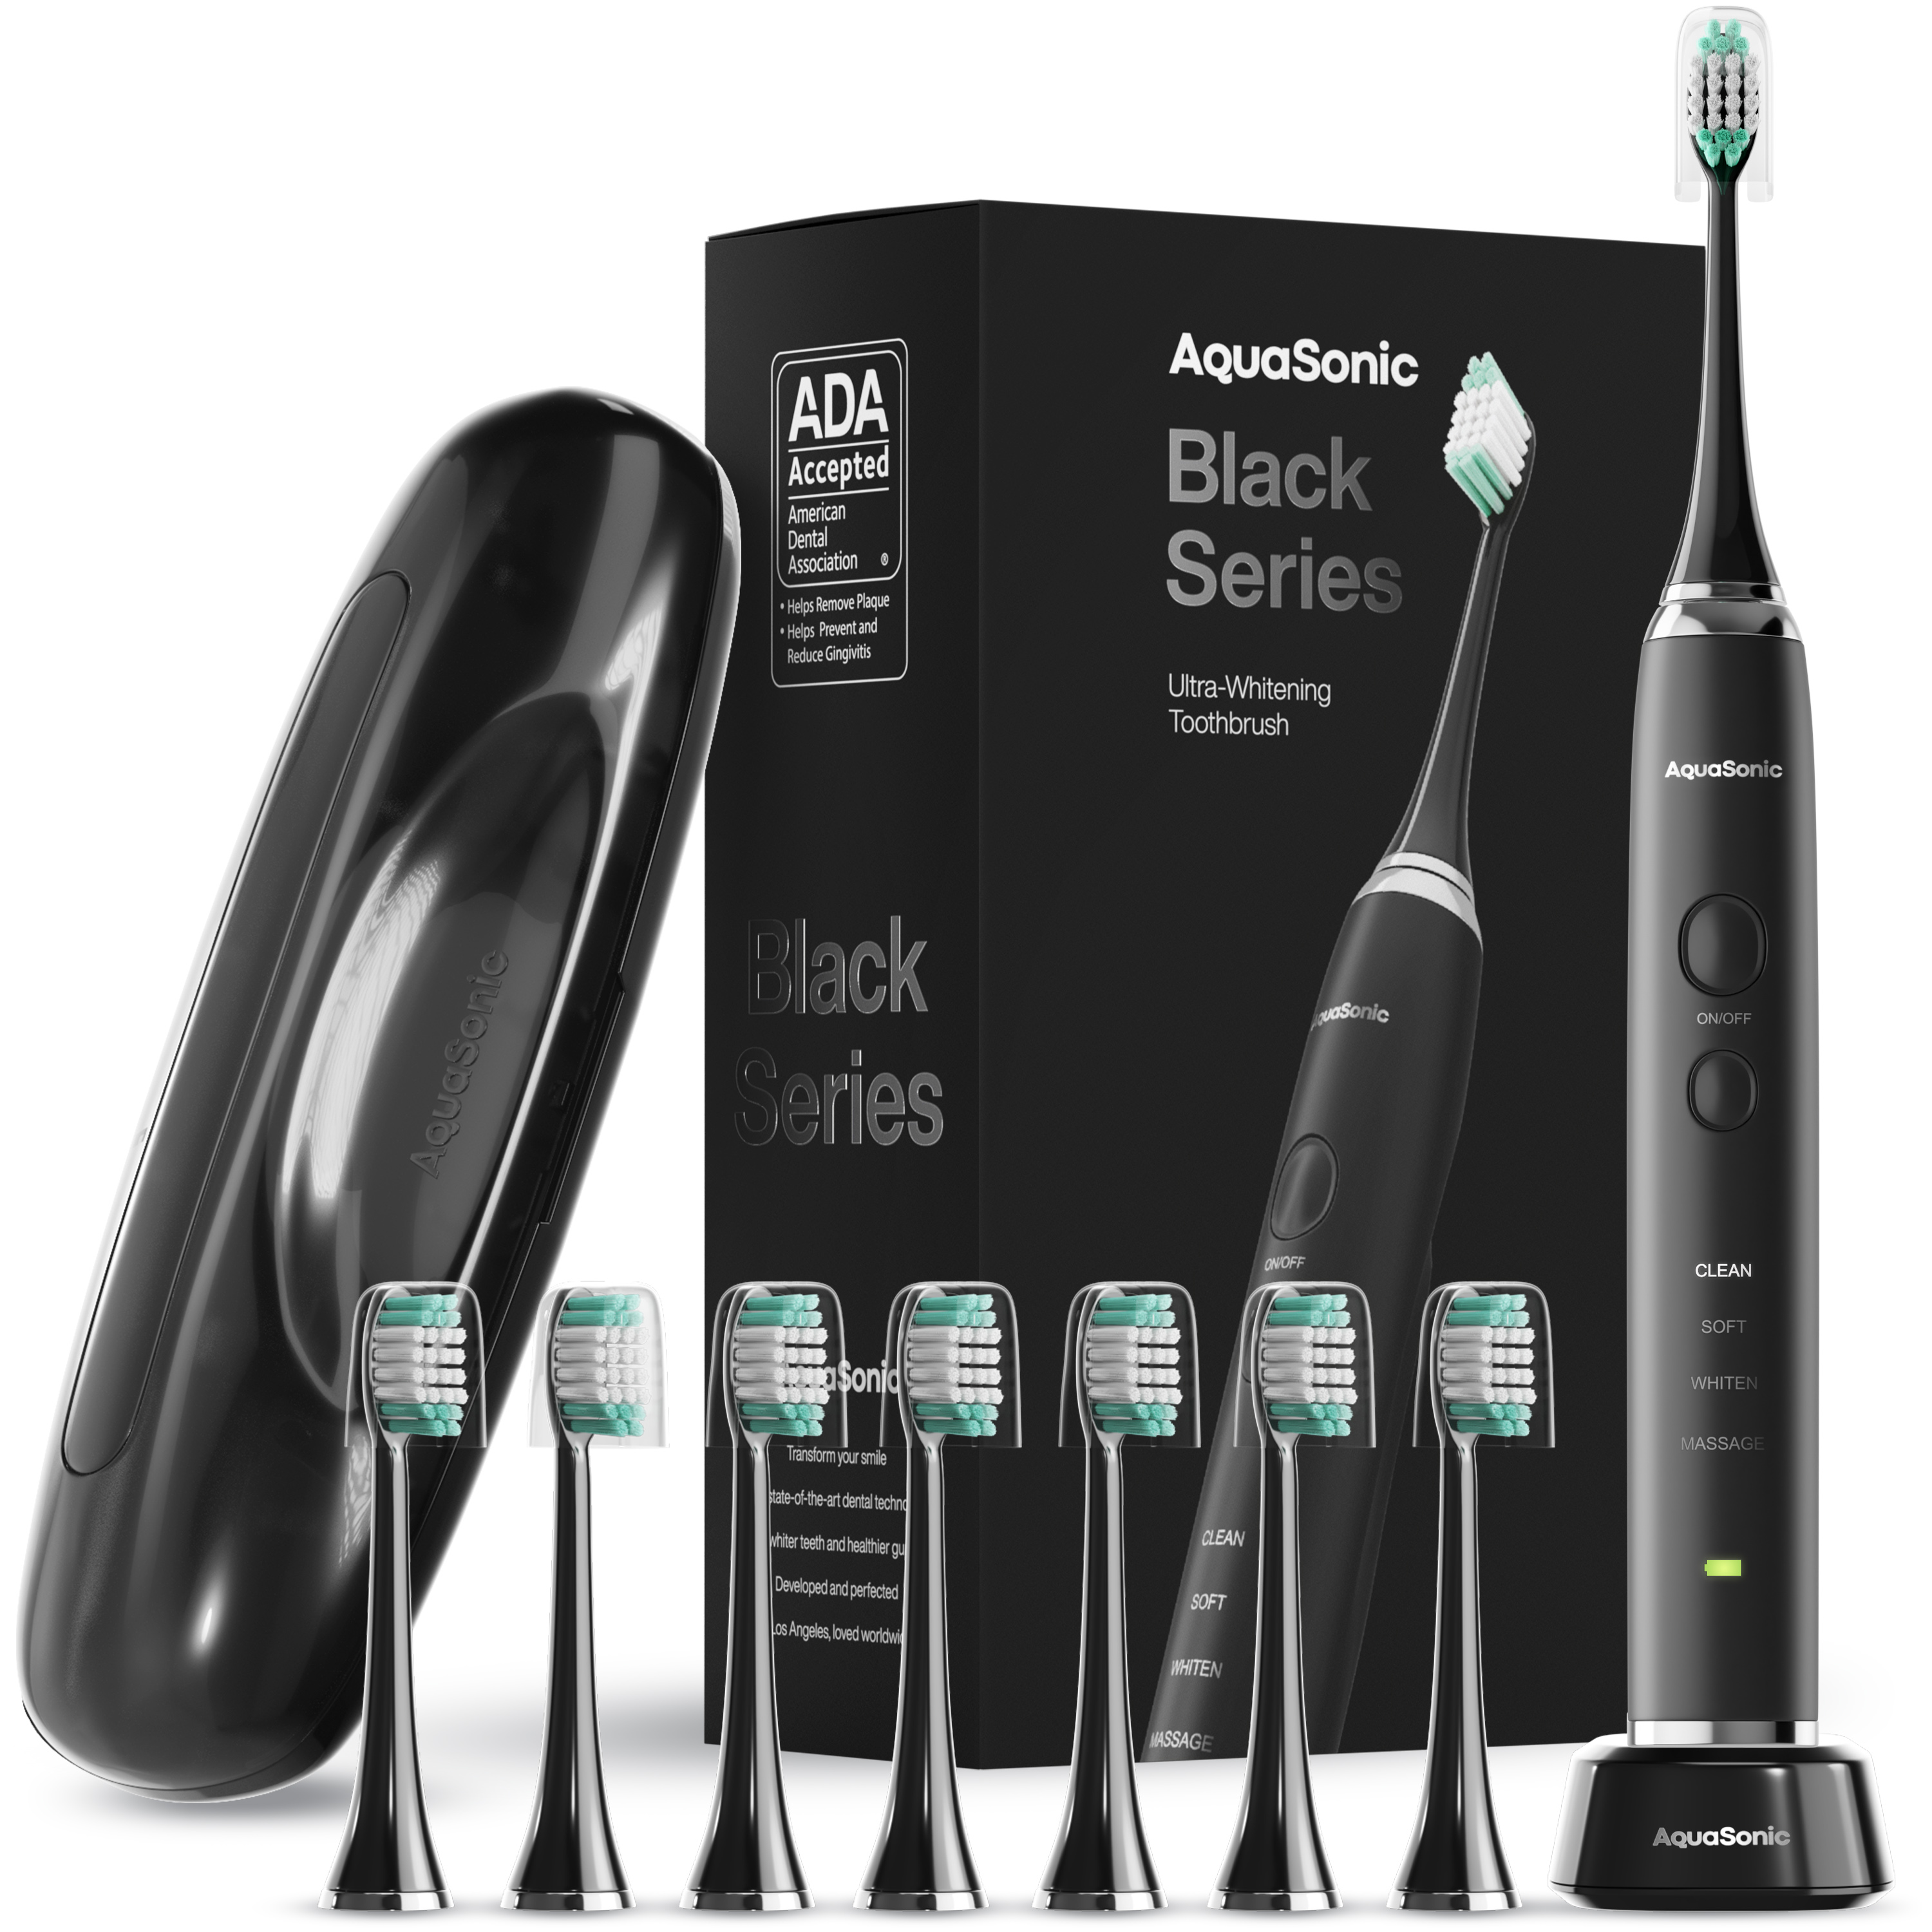 Aquasonic Electric Toothbrush Rechargeable Black Series w/ 8 Brush Heads & Travel Case - image 5 of 8